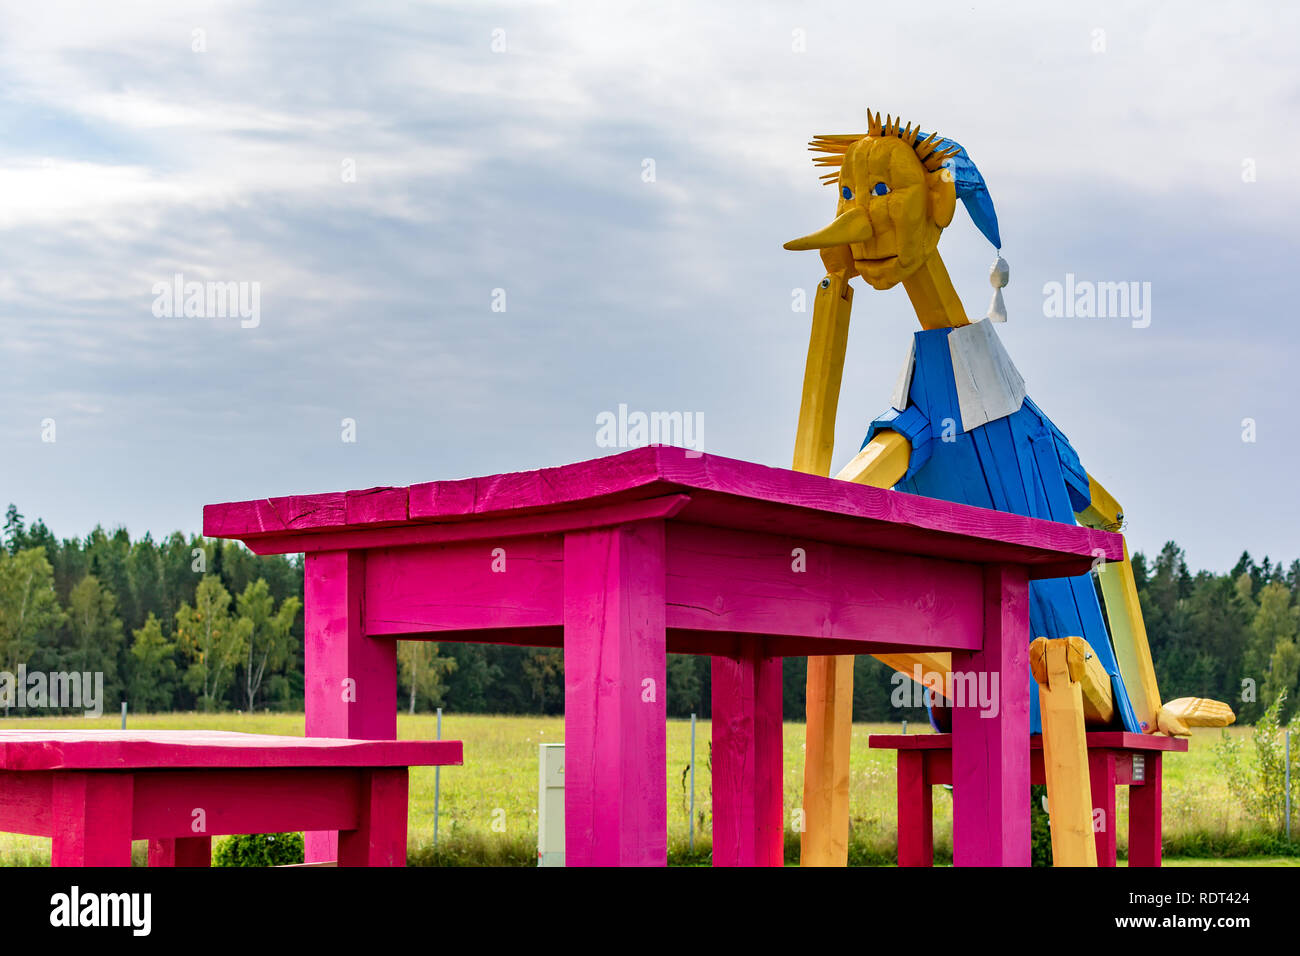 Anyksciai, Lithuania - September 8, 2018: Giant wooden Buratino (Pinocchio) sitting reflective at the enormous pink table in the park. Stock Photo